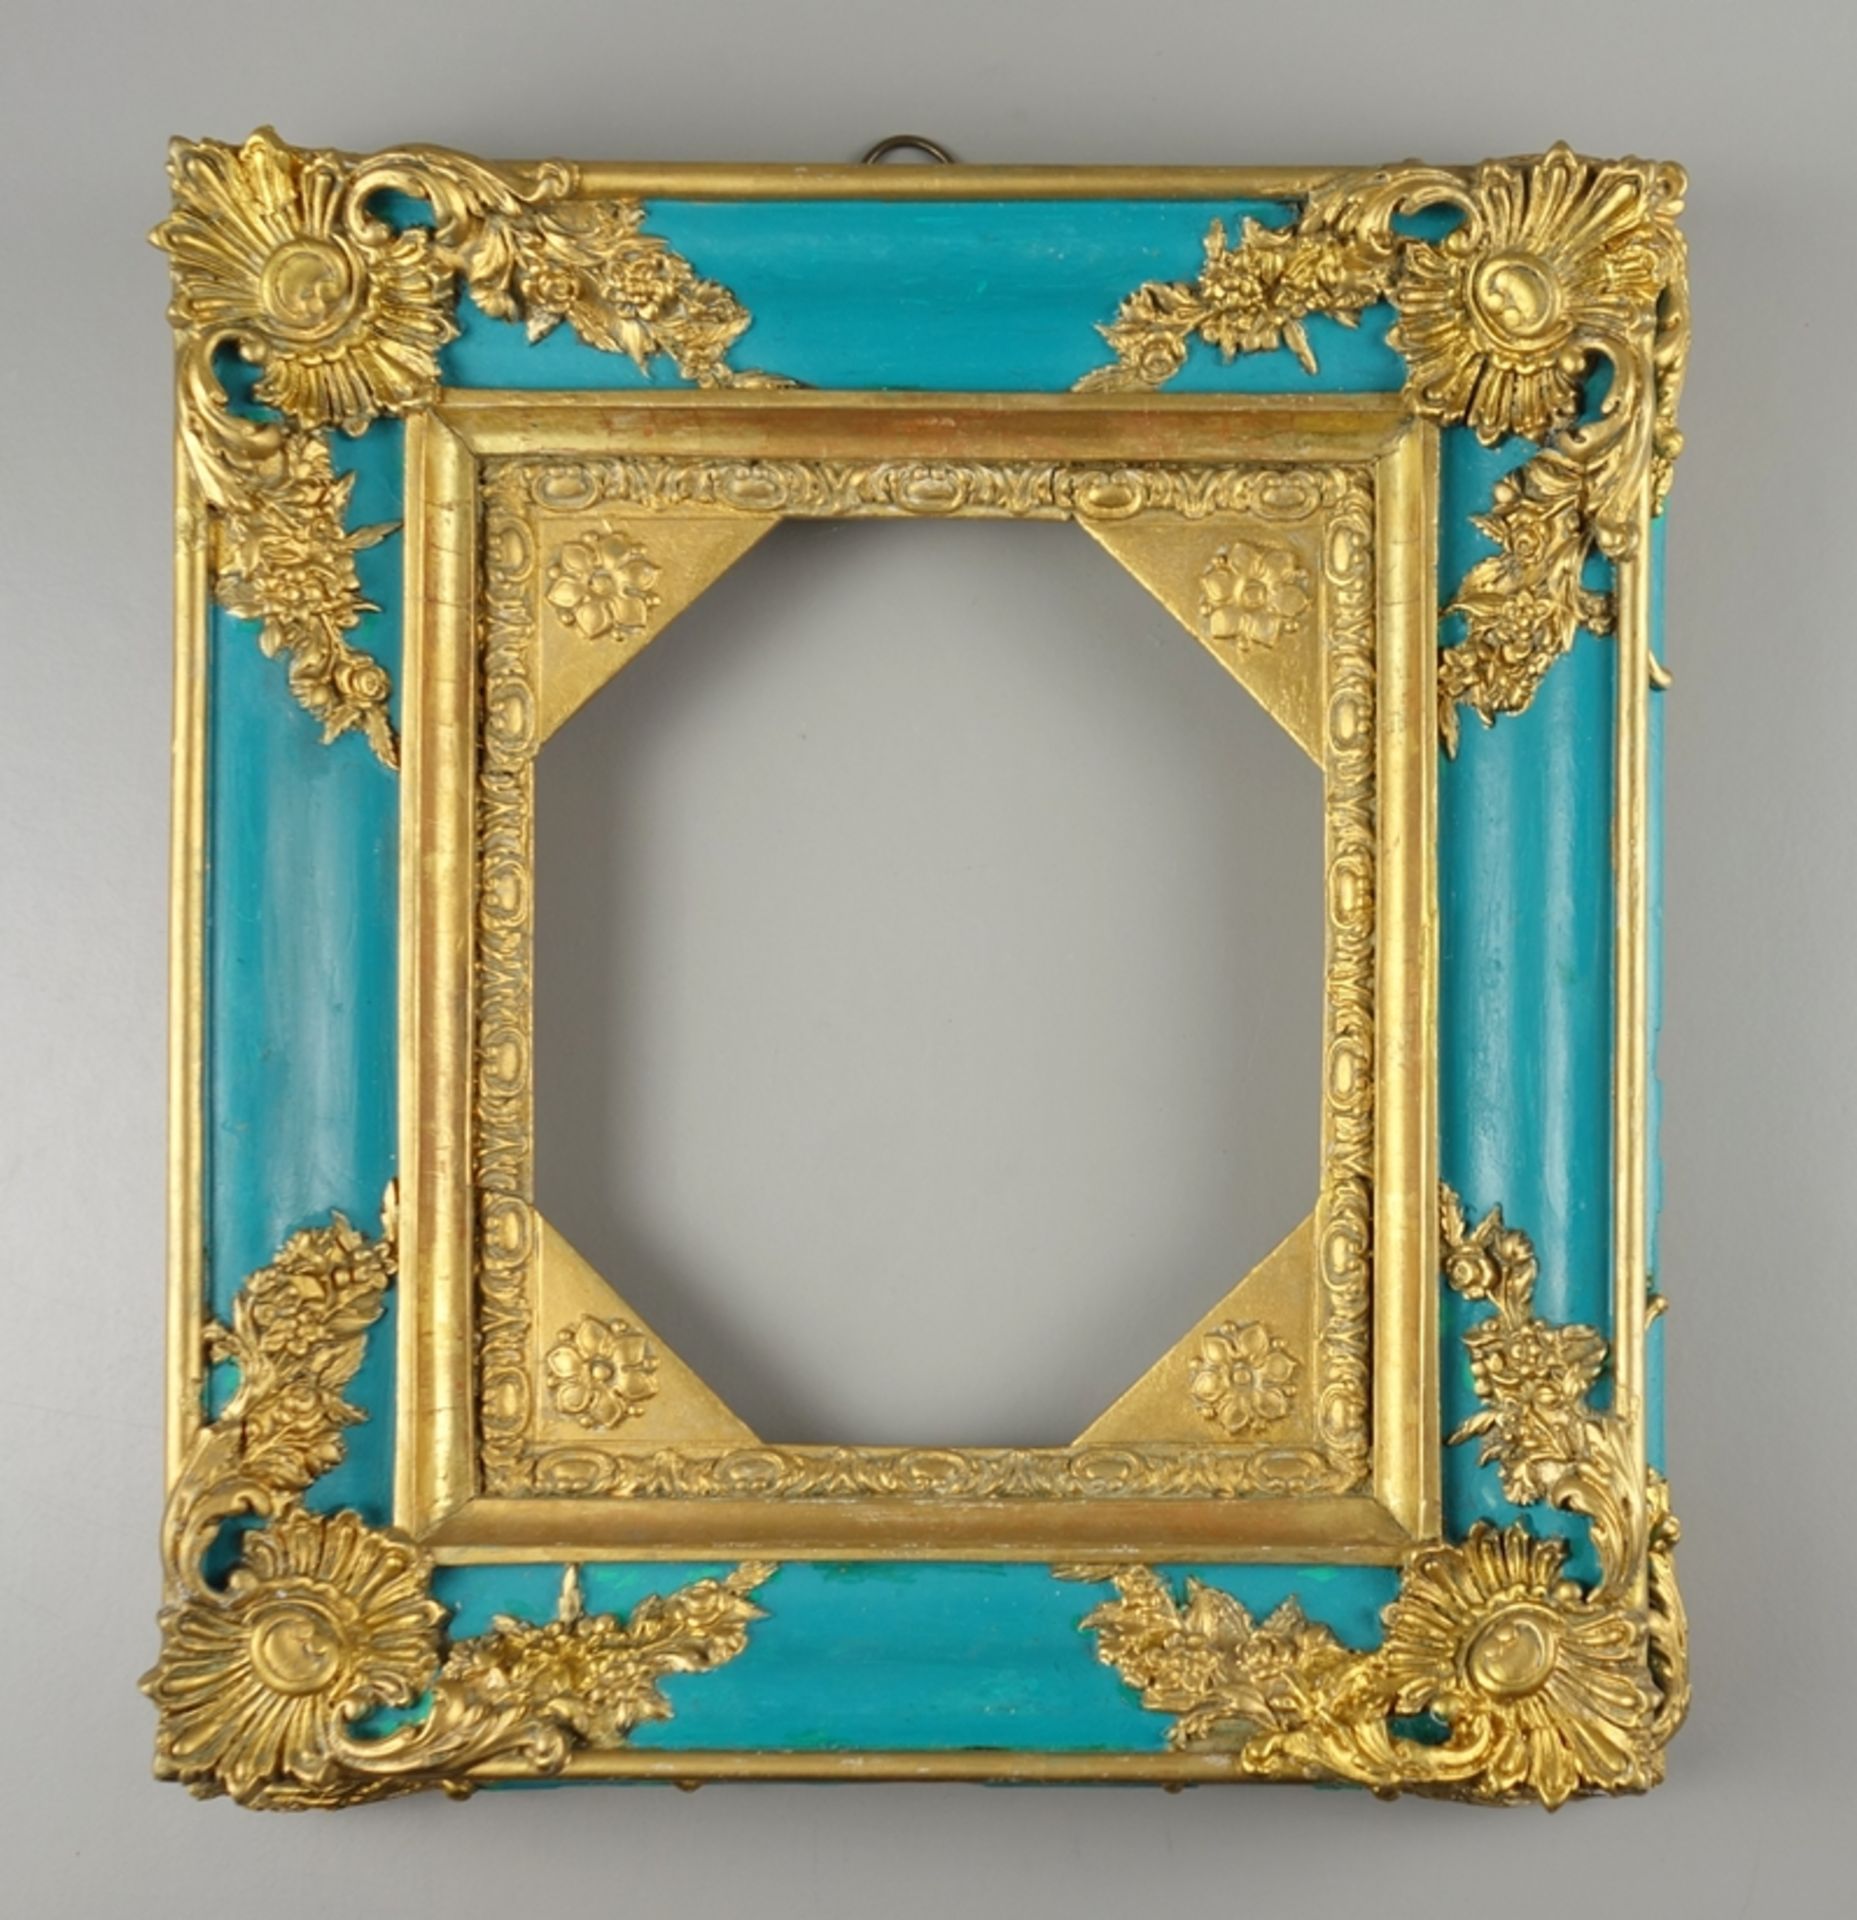 stuccoed historicist frame, turquoise lacquered ground, partly retouched